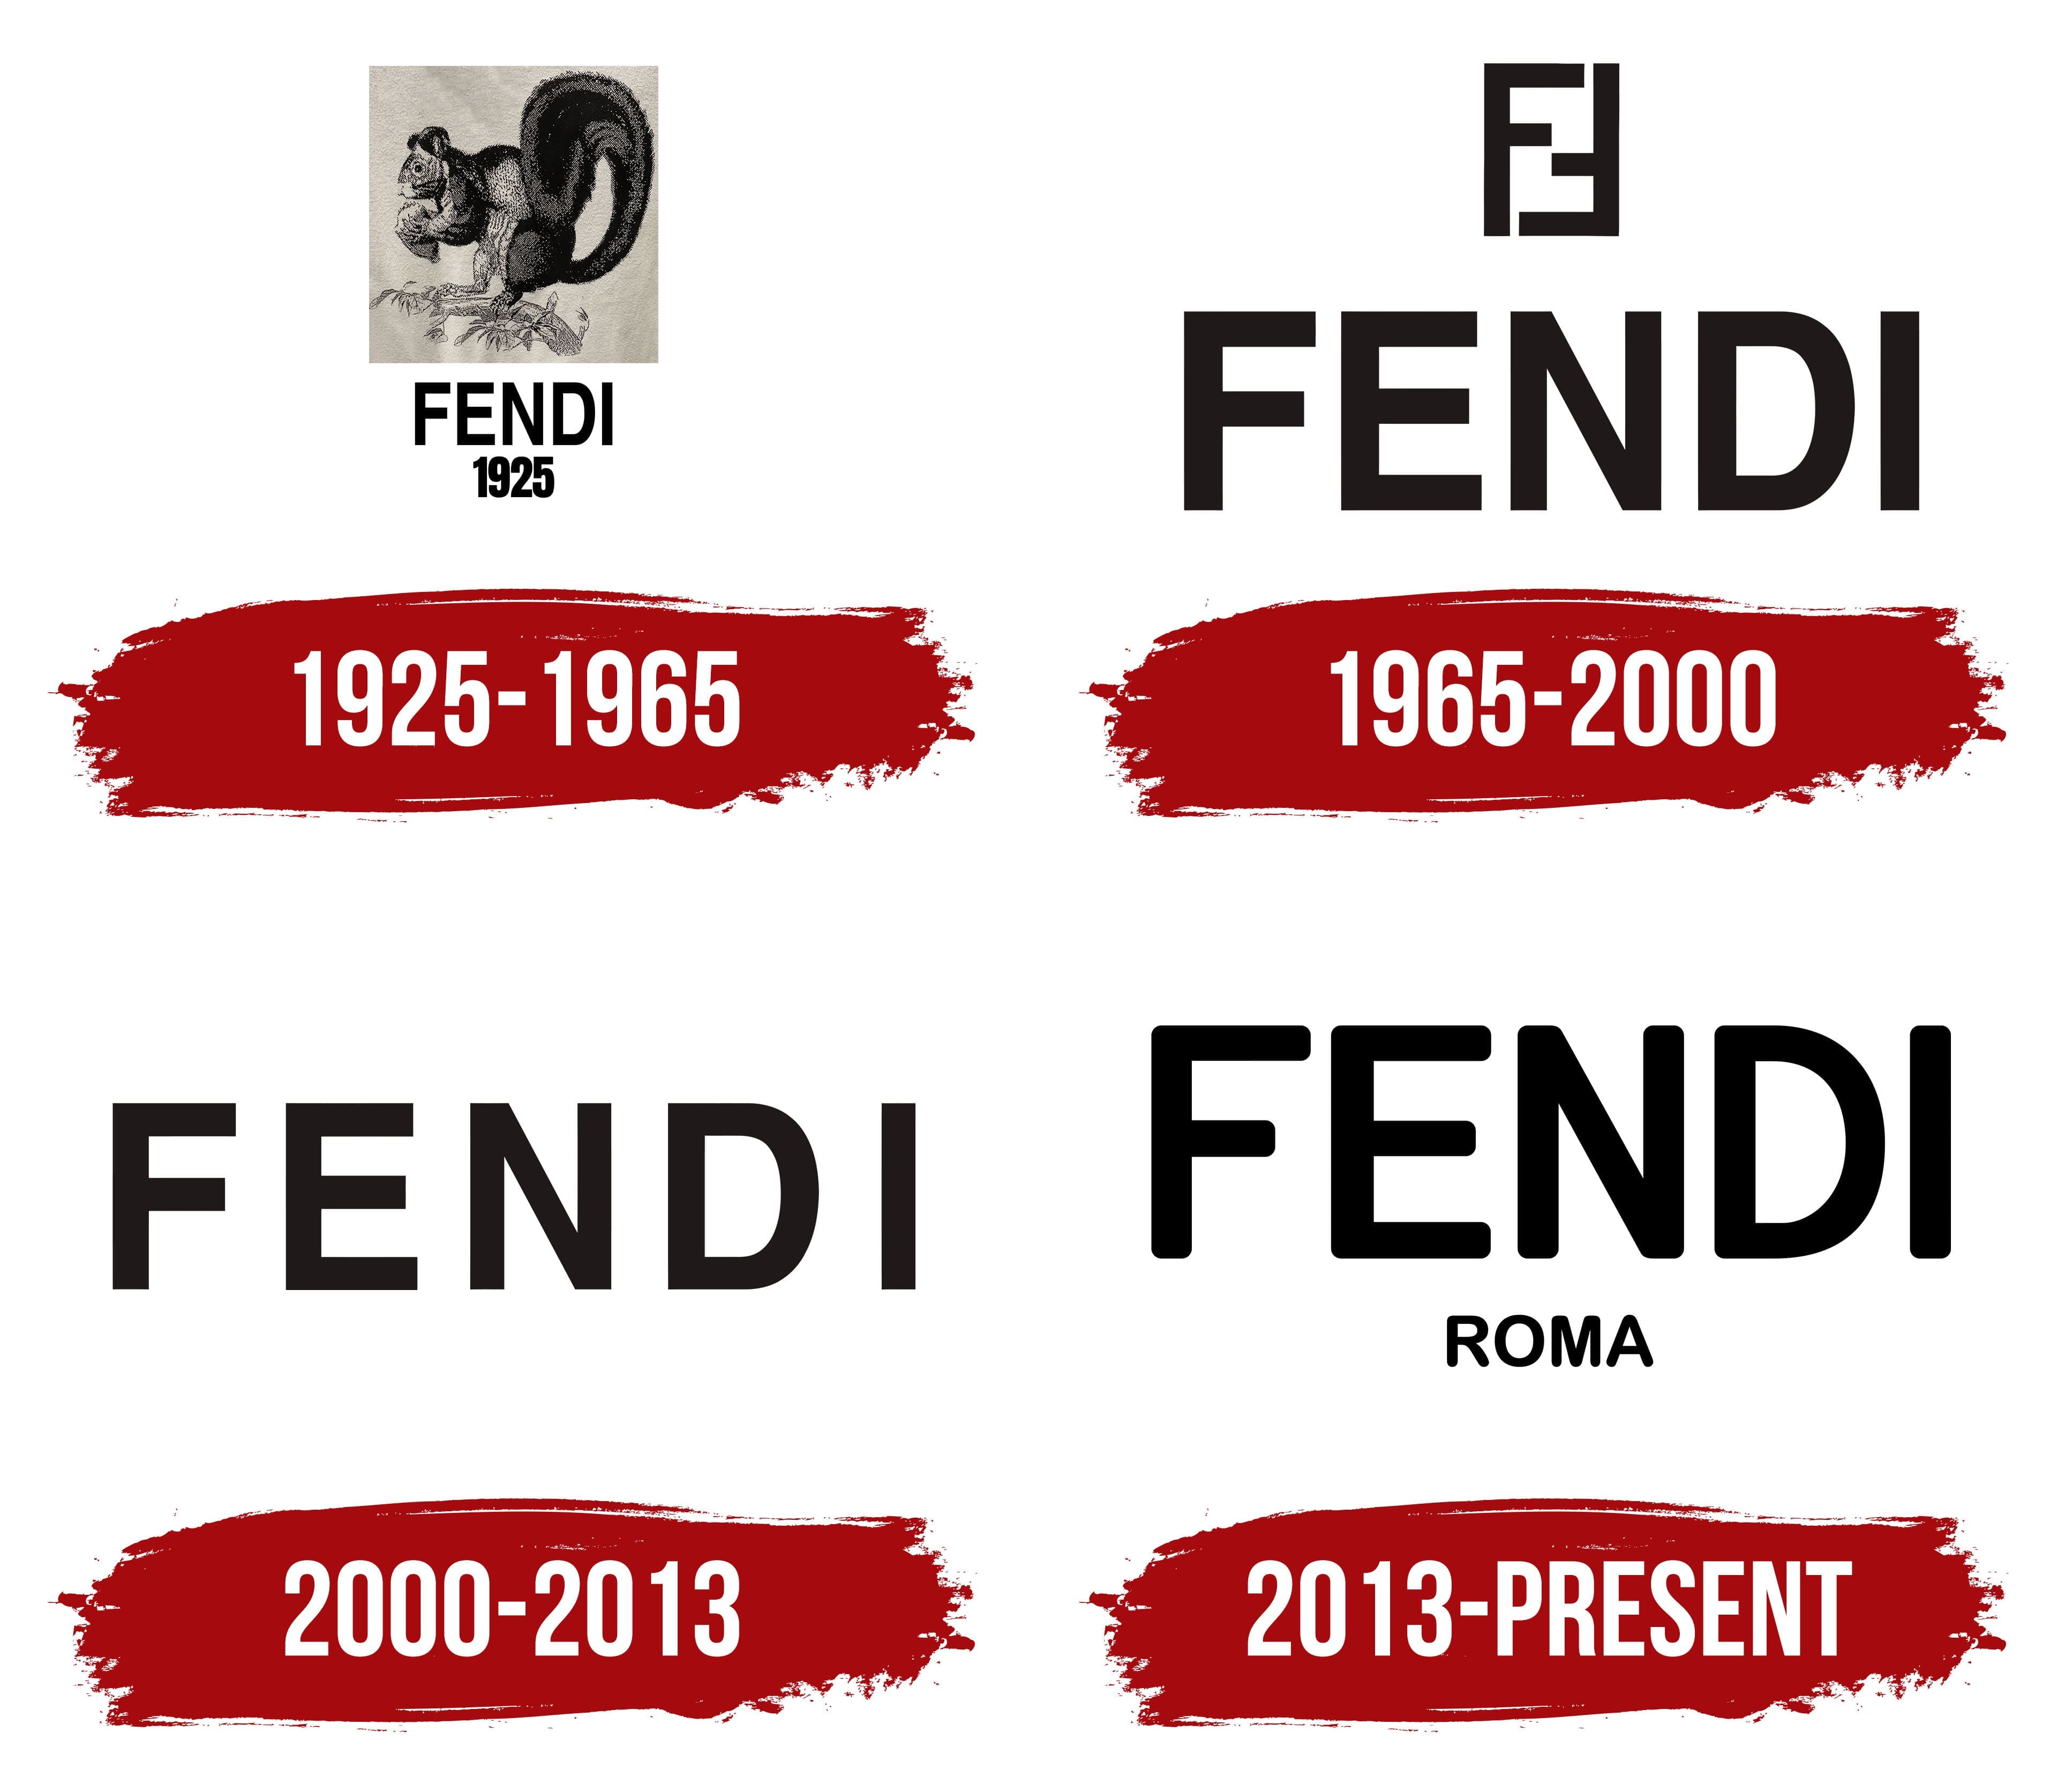 Fendi revives its iconic FF logo across a brand new collection – HERO